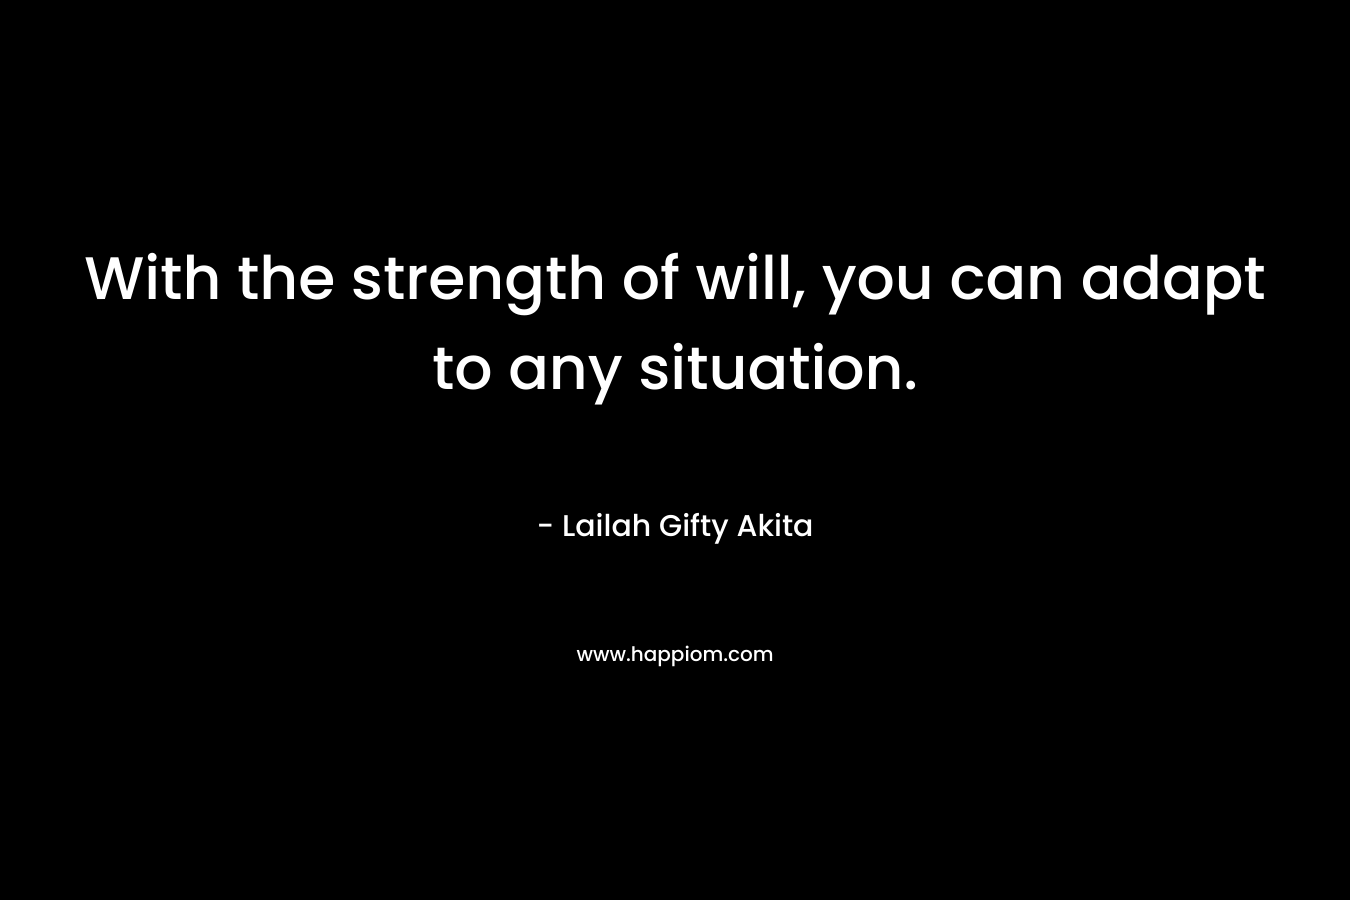 With the strength of will, you can adapt to any situation. – Lailah Gifty Akita